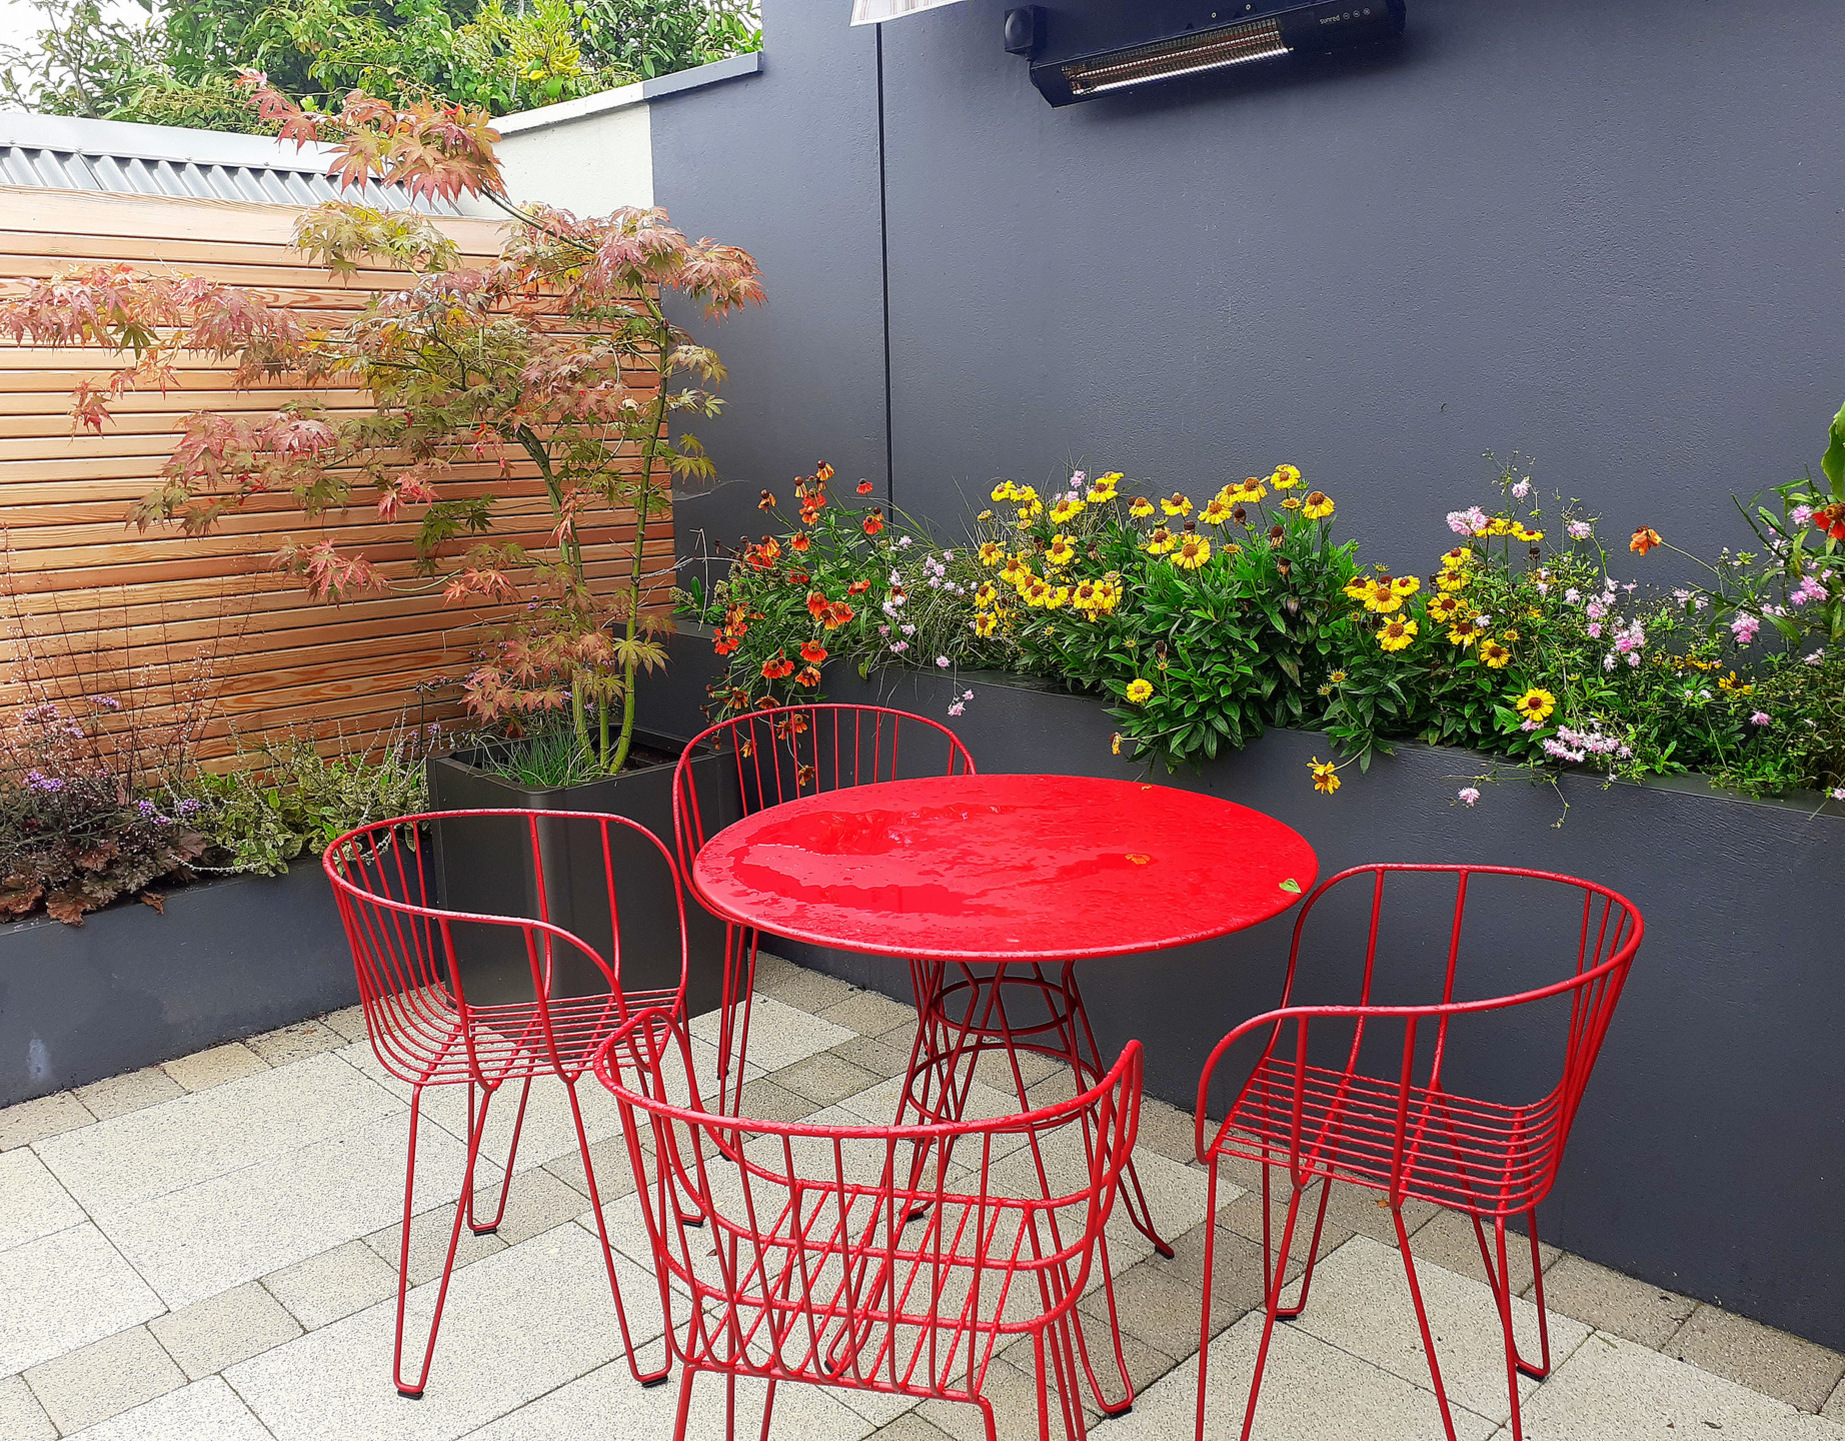 Biohort Belvedere Planters - stylish & robust steel planters | Supplied + fitted in Dundrum, Dublin 14